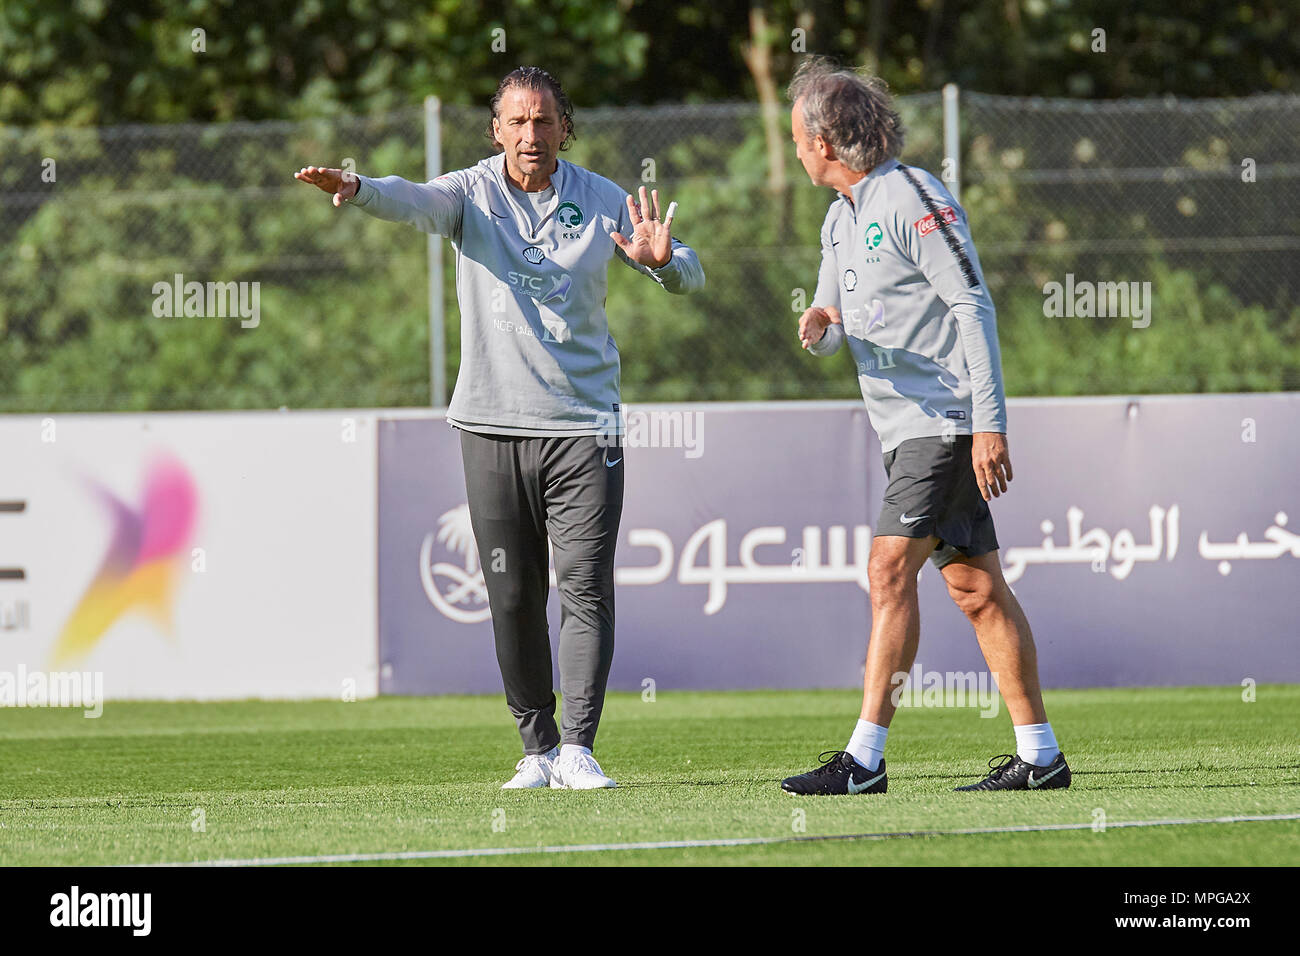 Bad Ragaz, Switzerland. 23rd May 2018. The coaches of the national football team from Saudi Arabia during a training session on the sports field Ri-Au in Bad Ragaz. The team around president Adel Ezzat and coach Juan Antonio Pizzi is staying in Bad Ragaz for two and a half weeks in prepararation of the FIFA World Cup final tournament in Russia. Credit: Rolf Simeon/Alamy Live News Stock Photo